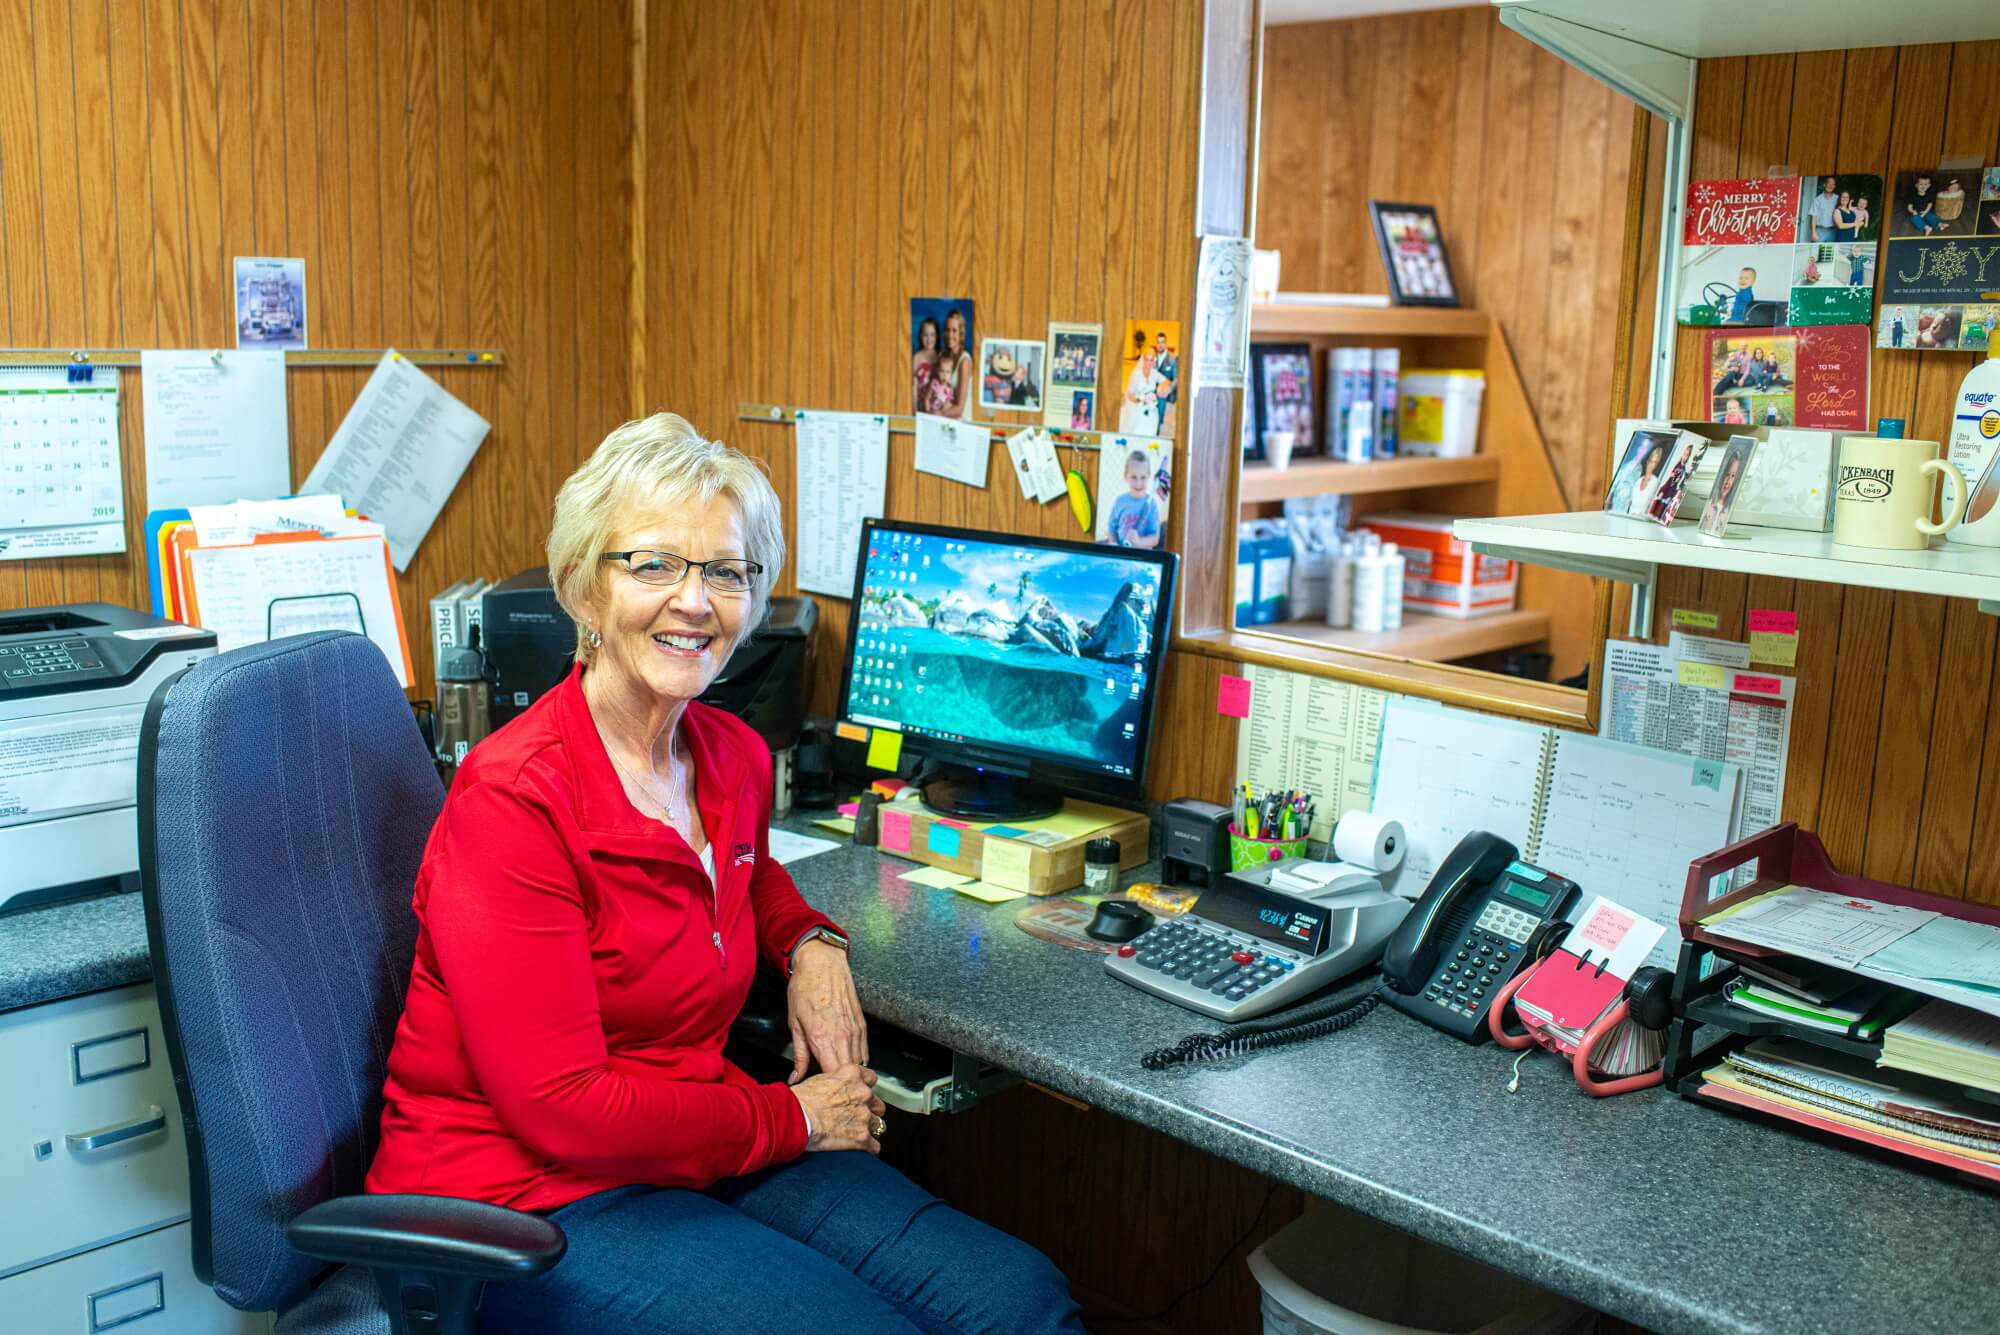 Suzy Smalley retires after 35 1/2 years with Mercer Landmark